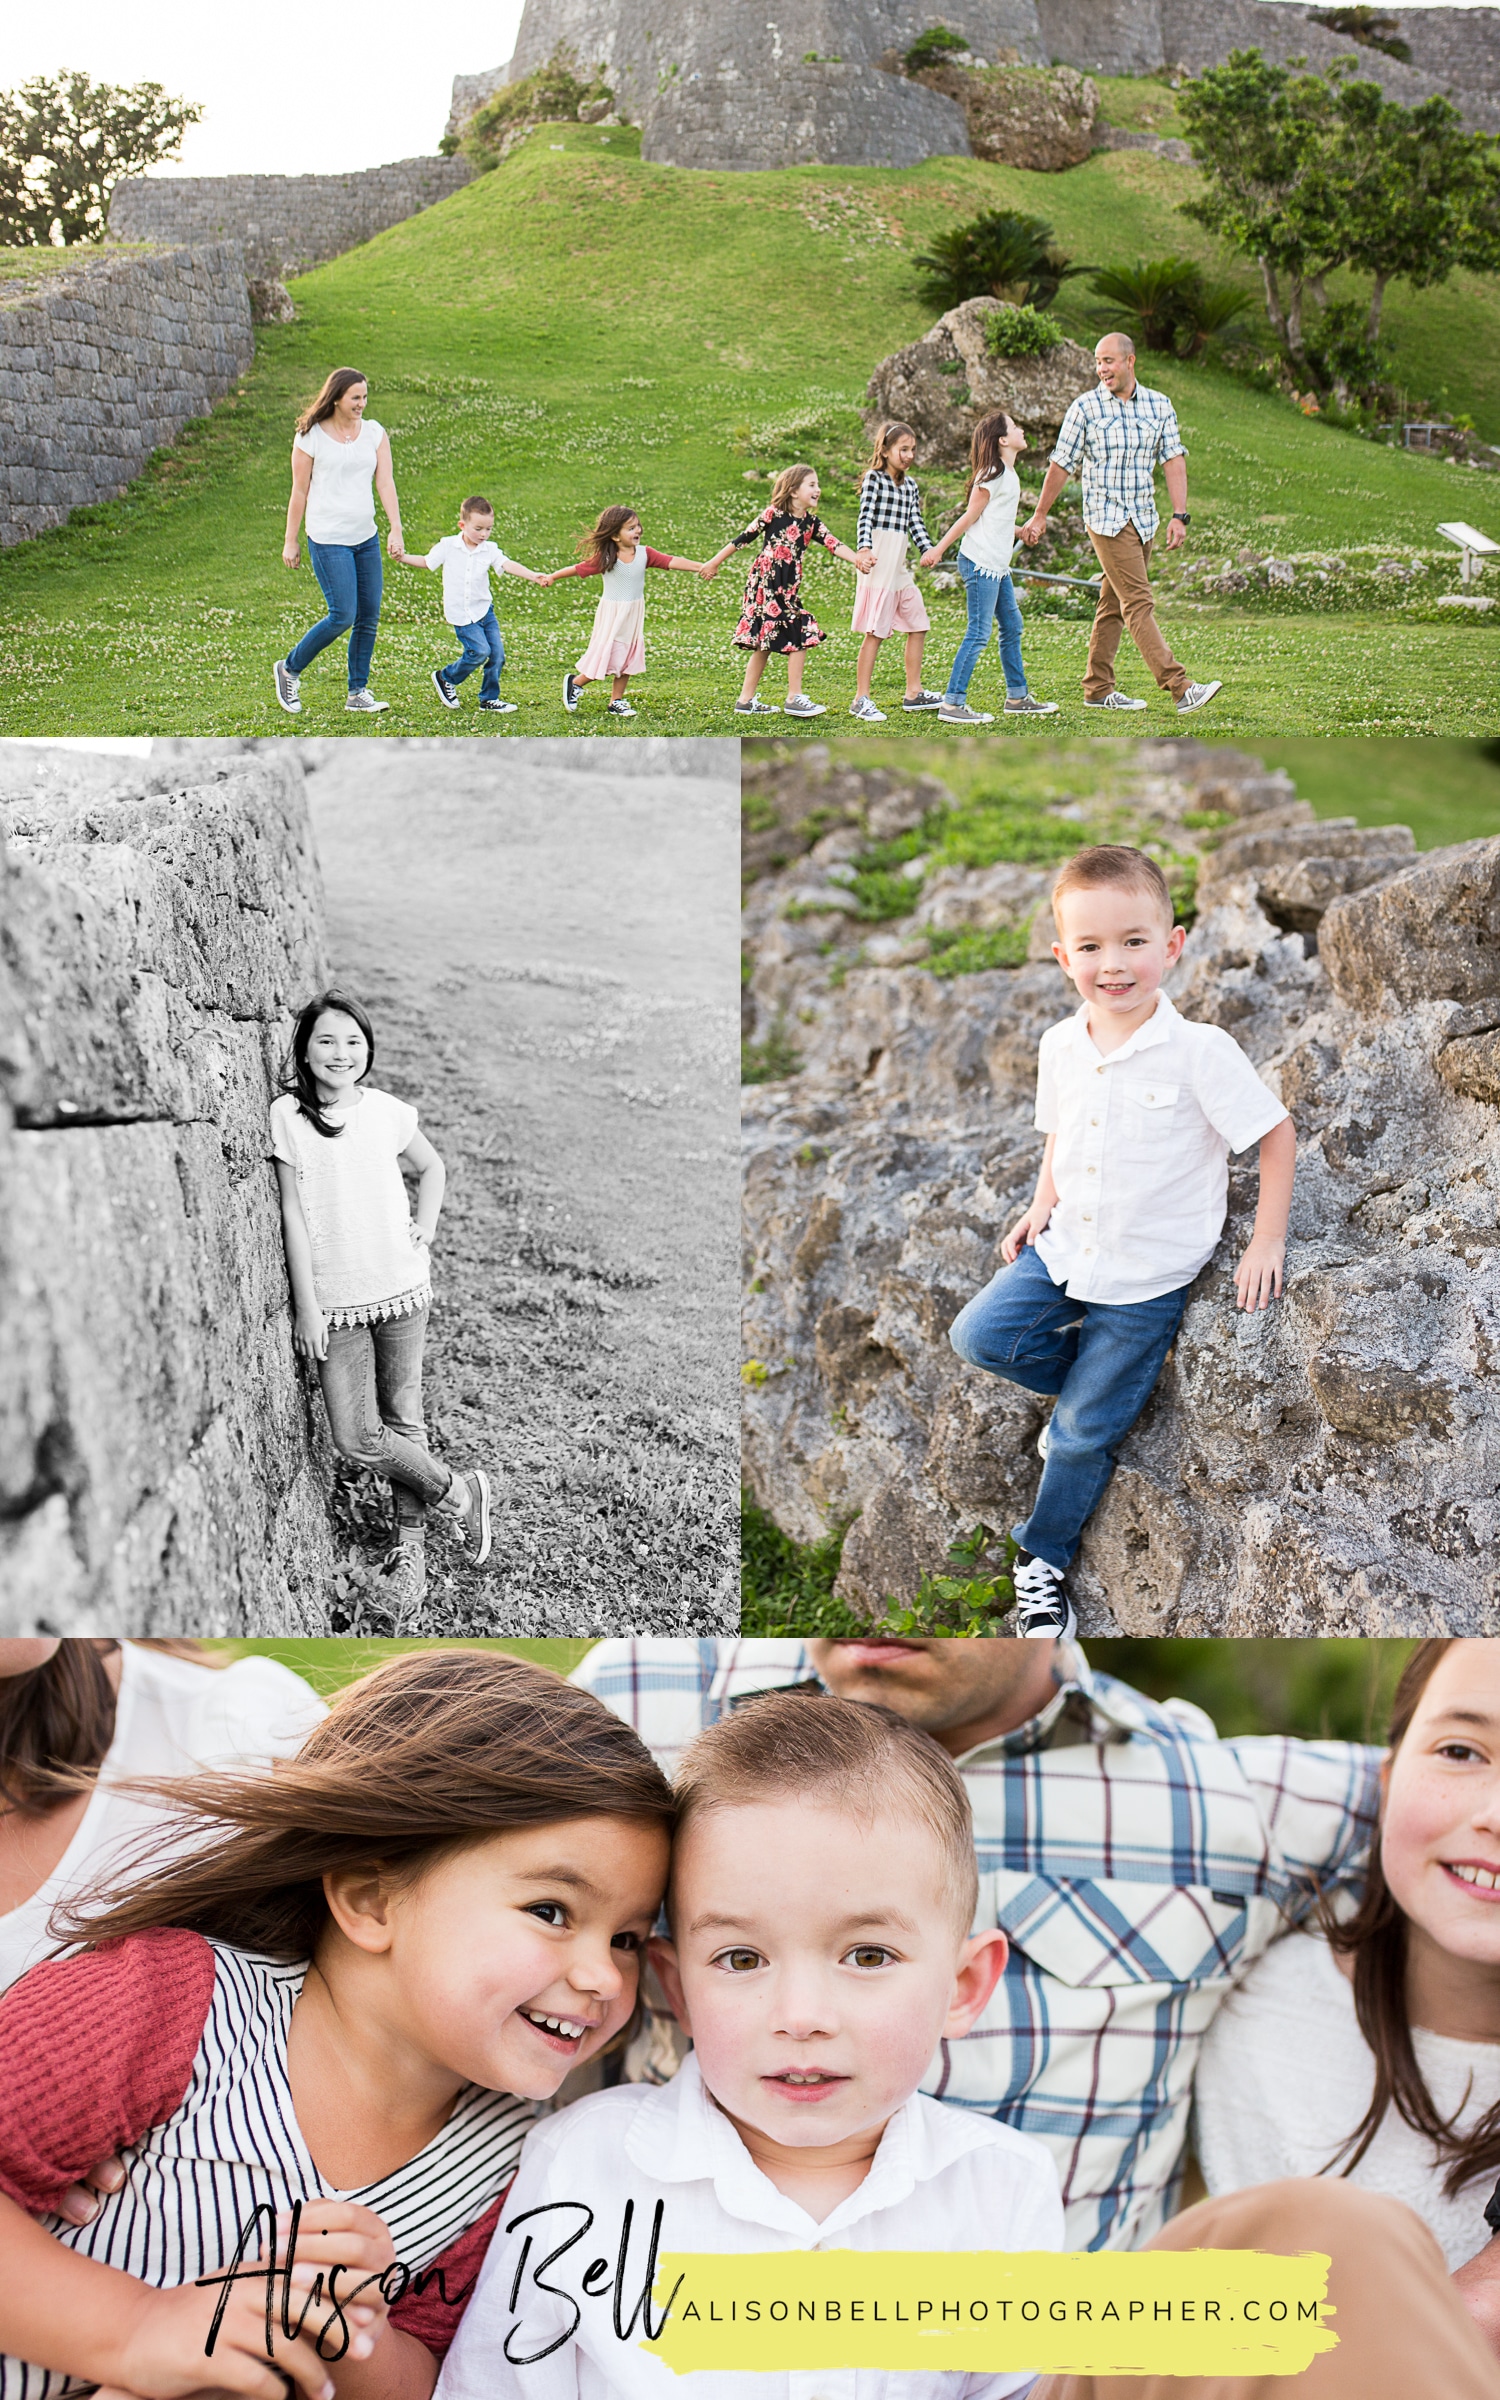 Large fun family photographer with seven kids at Katsuren Castle in Okinawa Japan by Alison Bell, Photographer